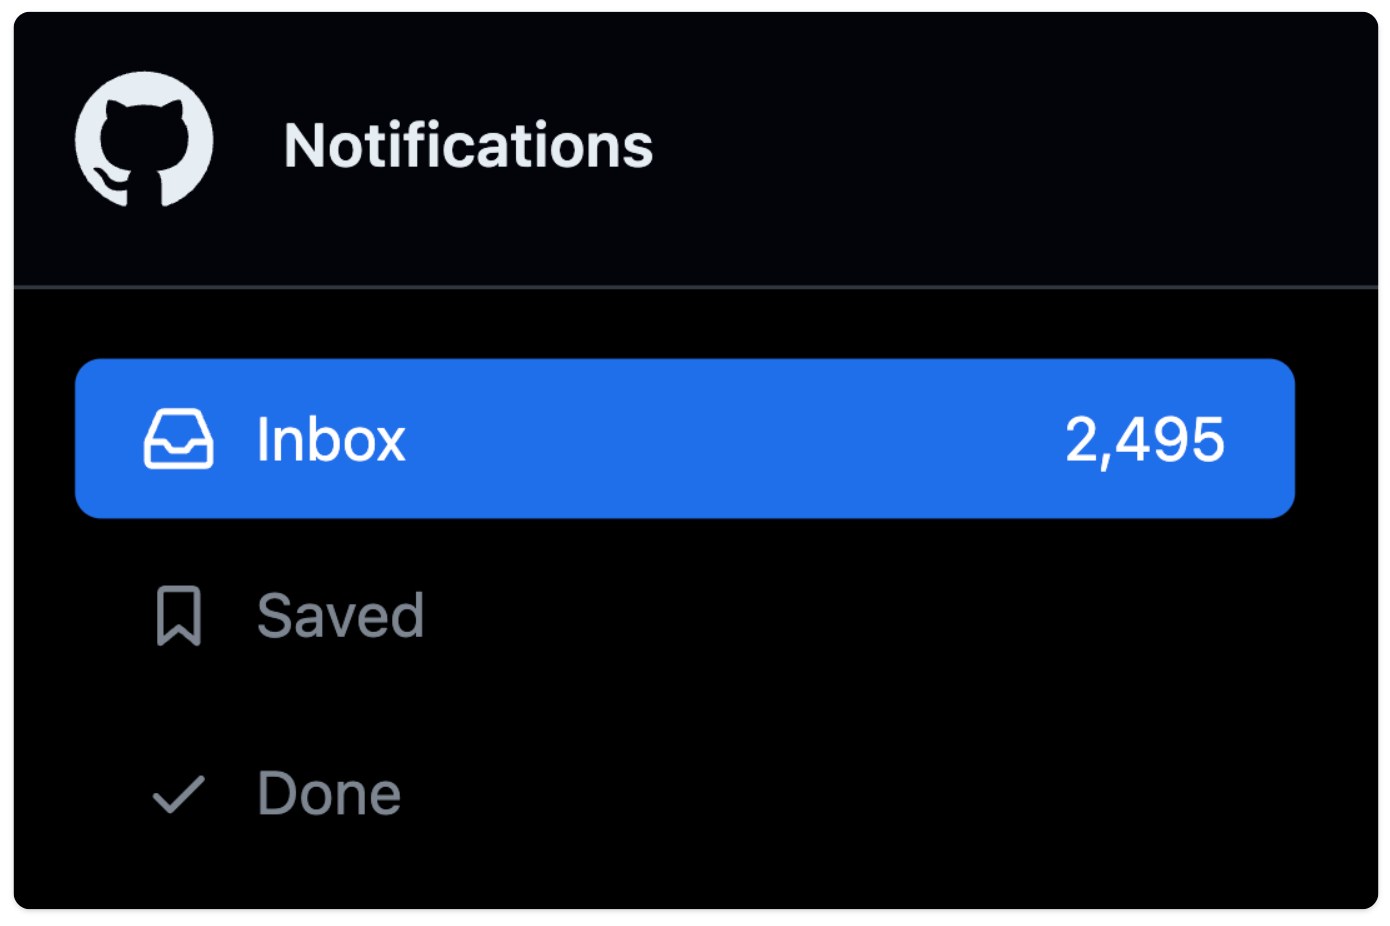 screenshot showing number of notifications at 2,495, from blog page of Anthony Fu writing about how he manages GitHub notifications.